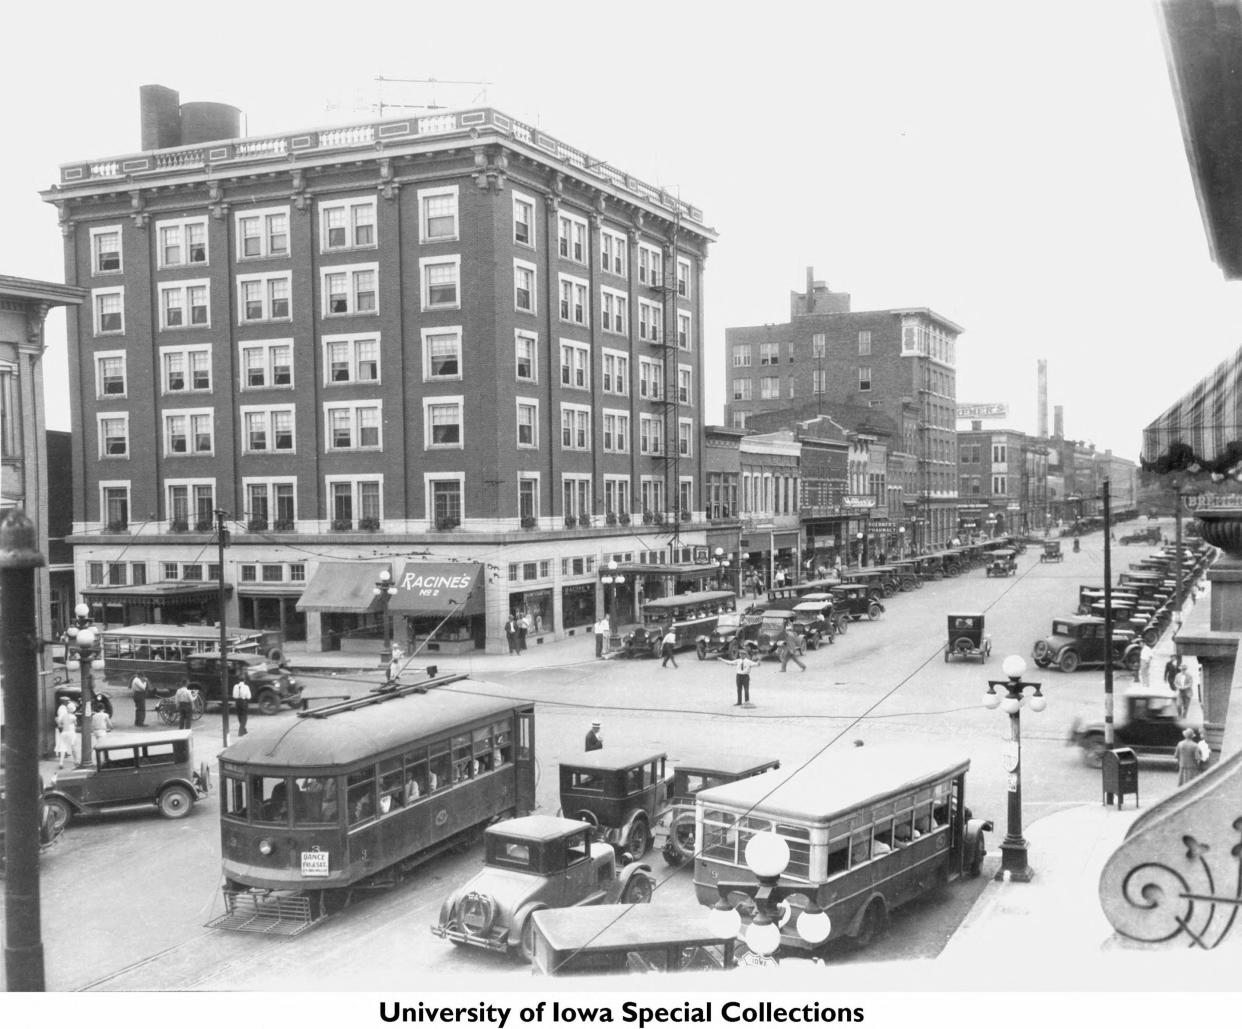 You can see three modes of early transportation – cars, busses, and a trolley -- in this 1920s vintage photo looking west on Washington Street toward the historic Jefferson Hotel in a thriving downtown Iowa City.